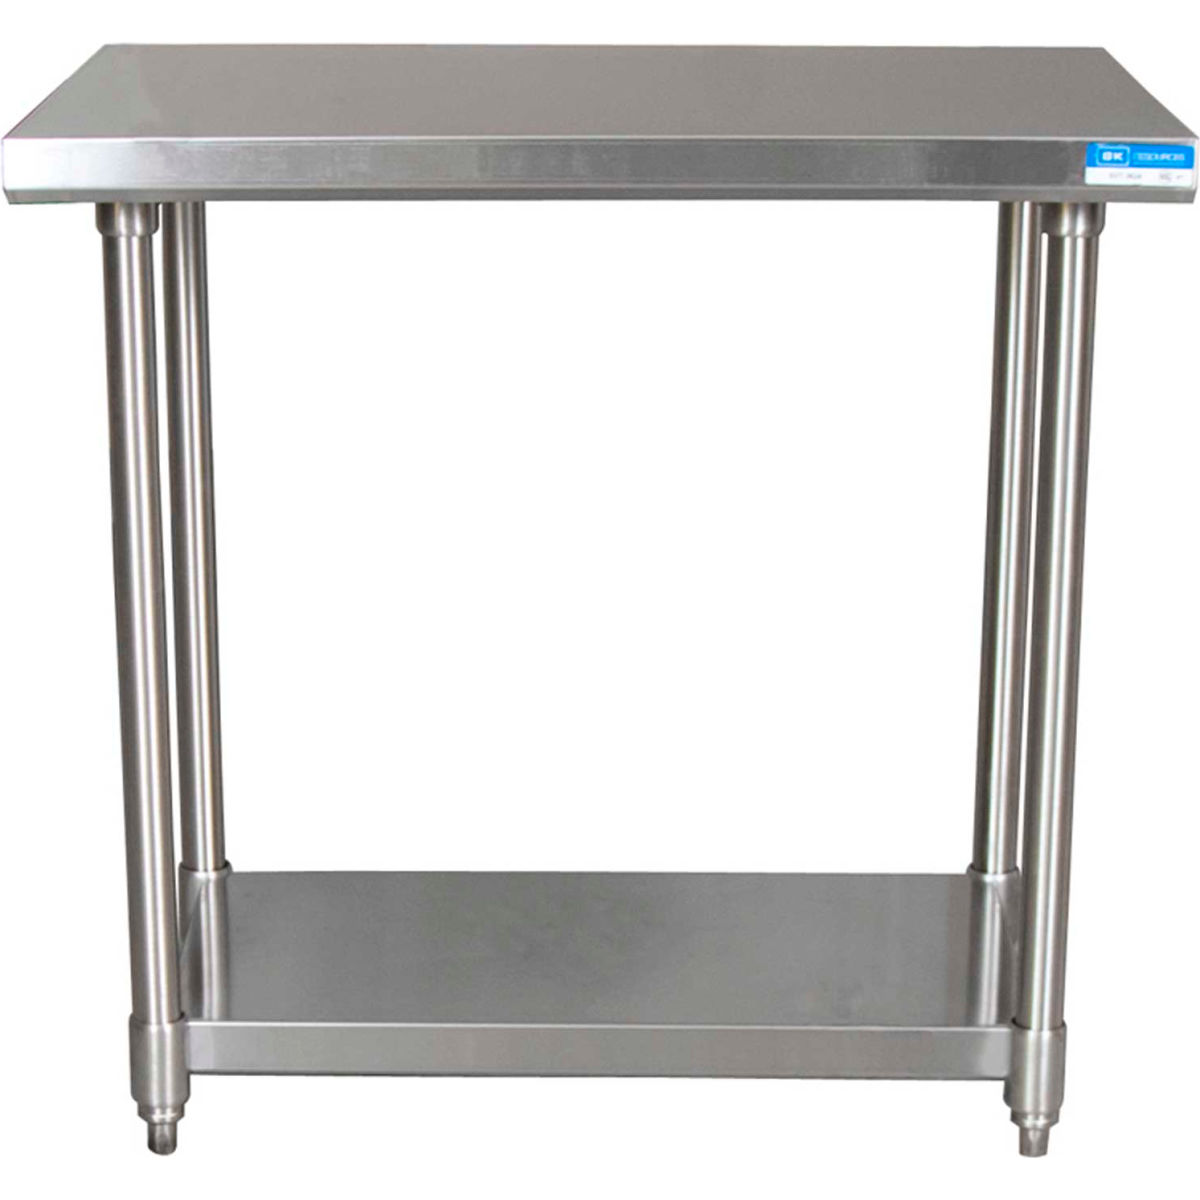 Picture of BK Resources B1516253 16 Gauge 304 Series Stainless Workbench with Adjustable Undershelf - 36 x 24 in.